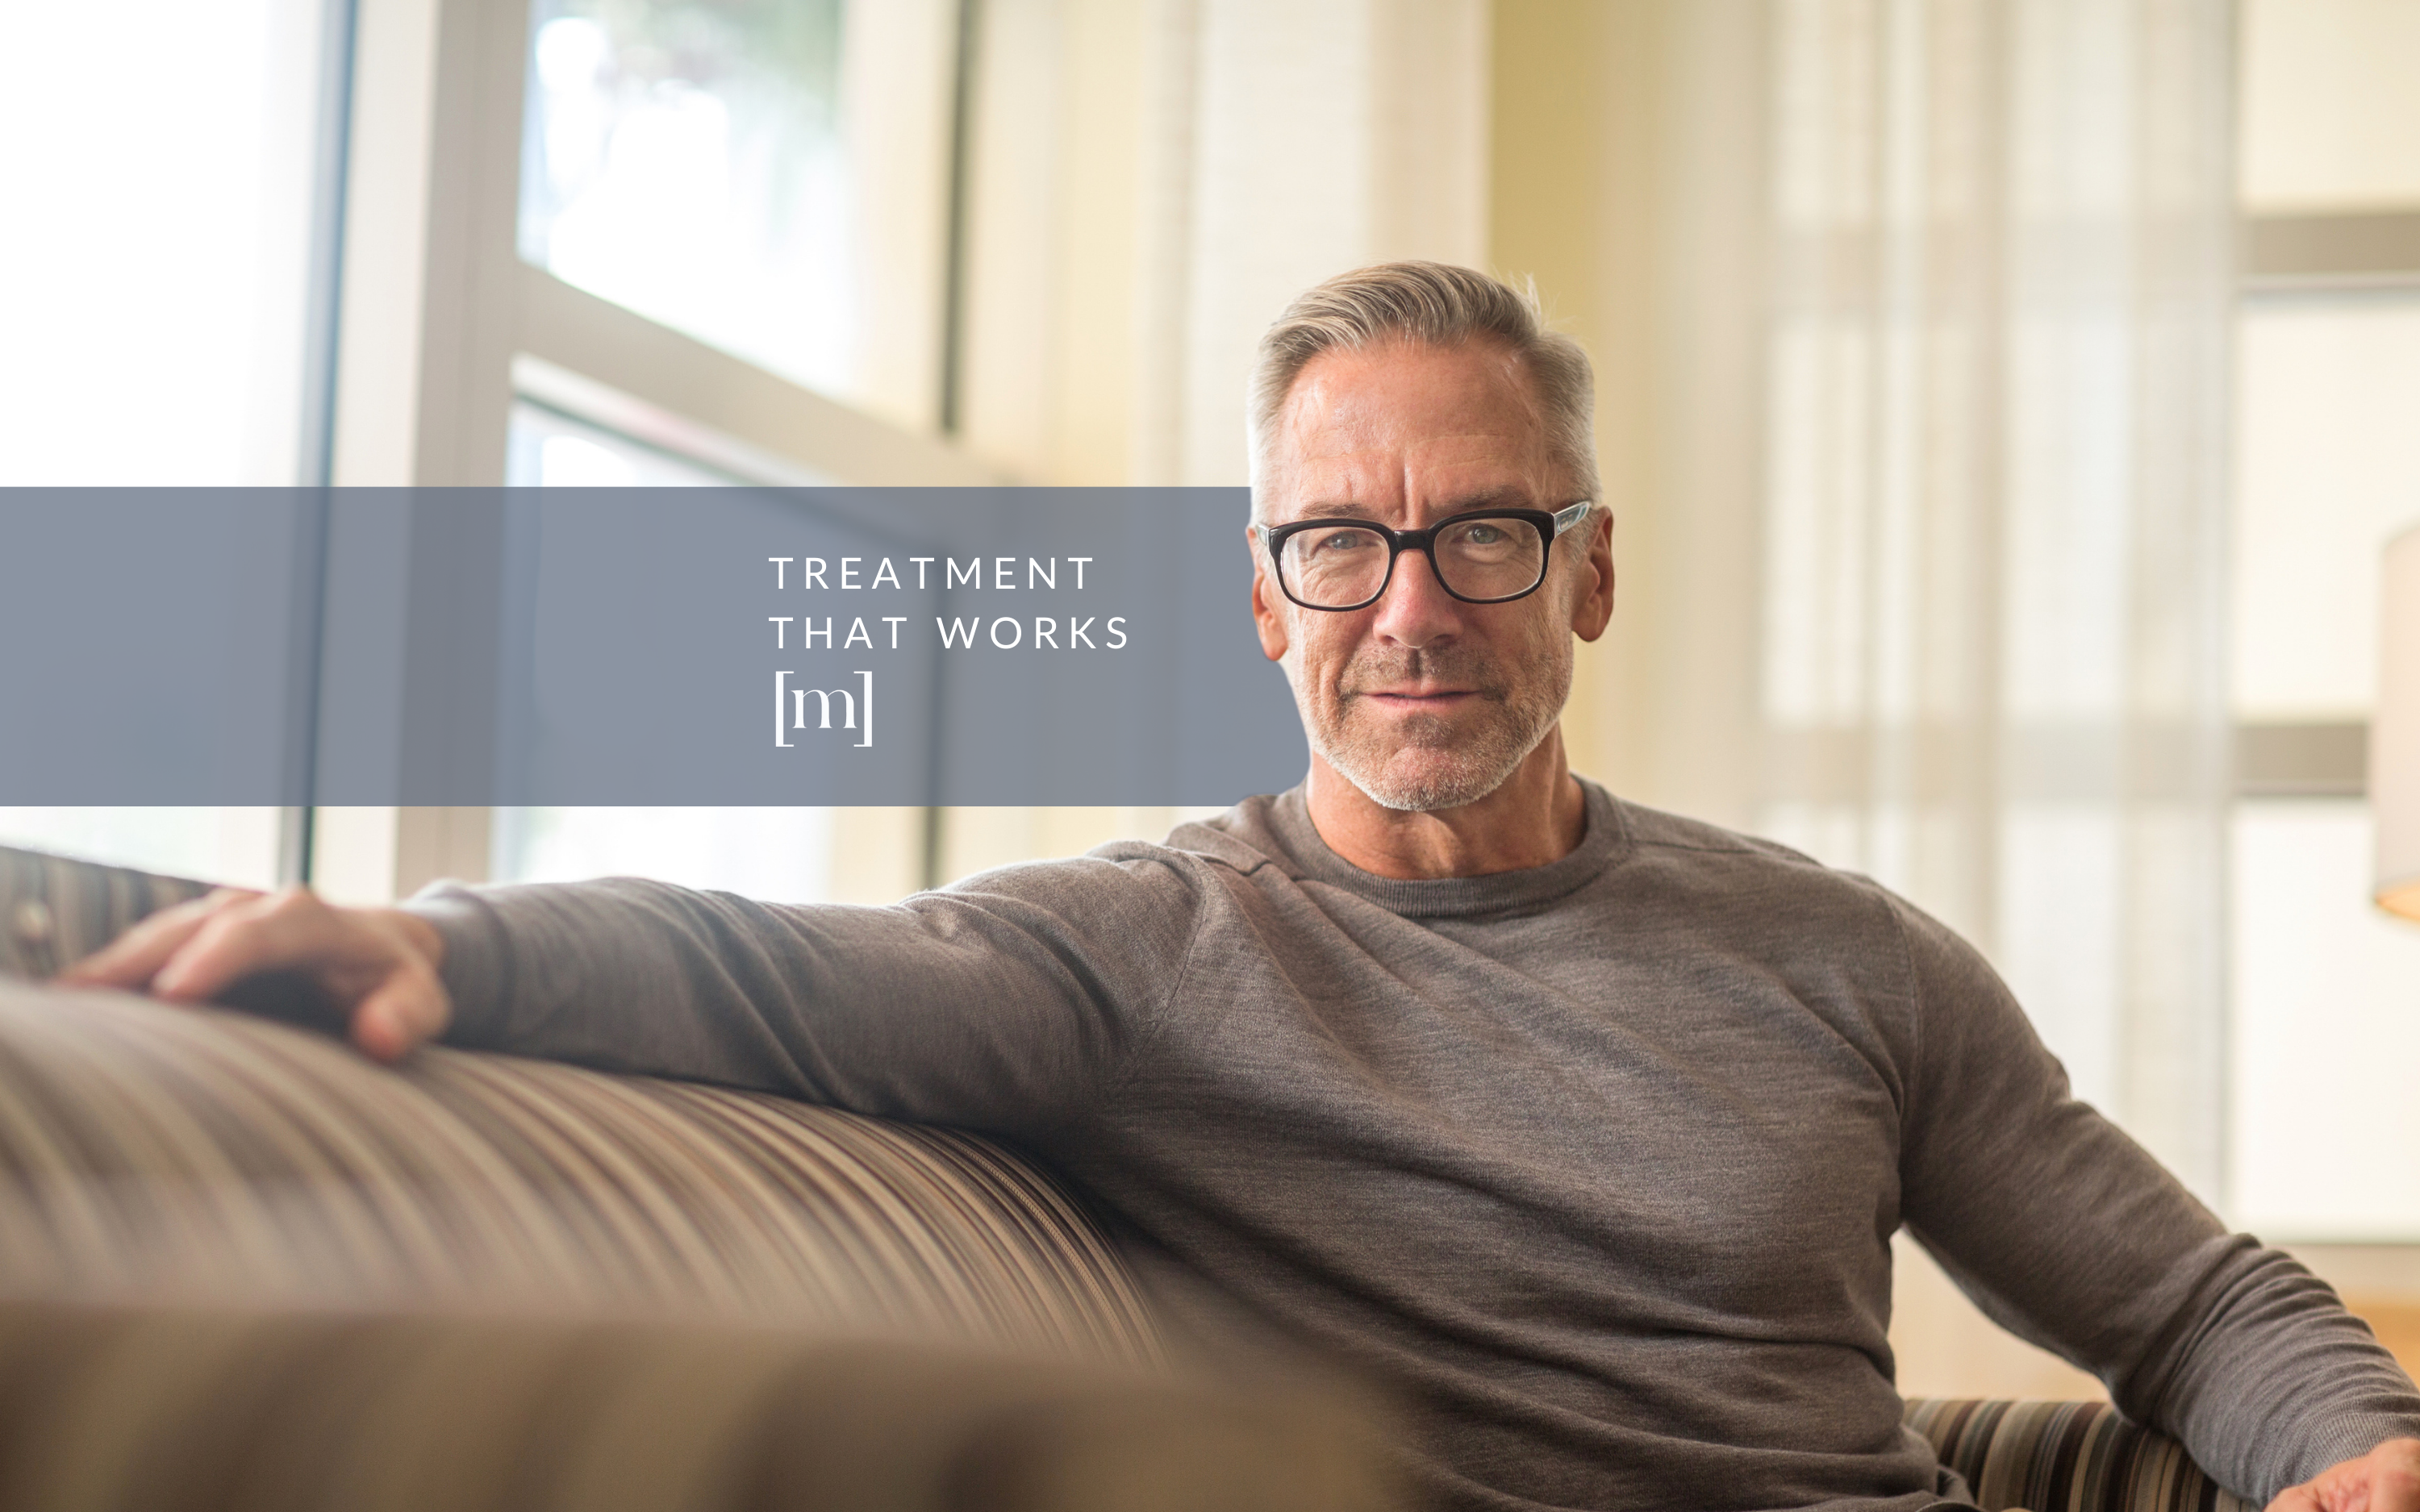 Mens Testosterone Hormone Replacement Therapy Experts Hrt Experts In Minneapolis Minnetonka Wayzata Oakdale Mn